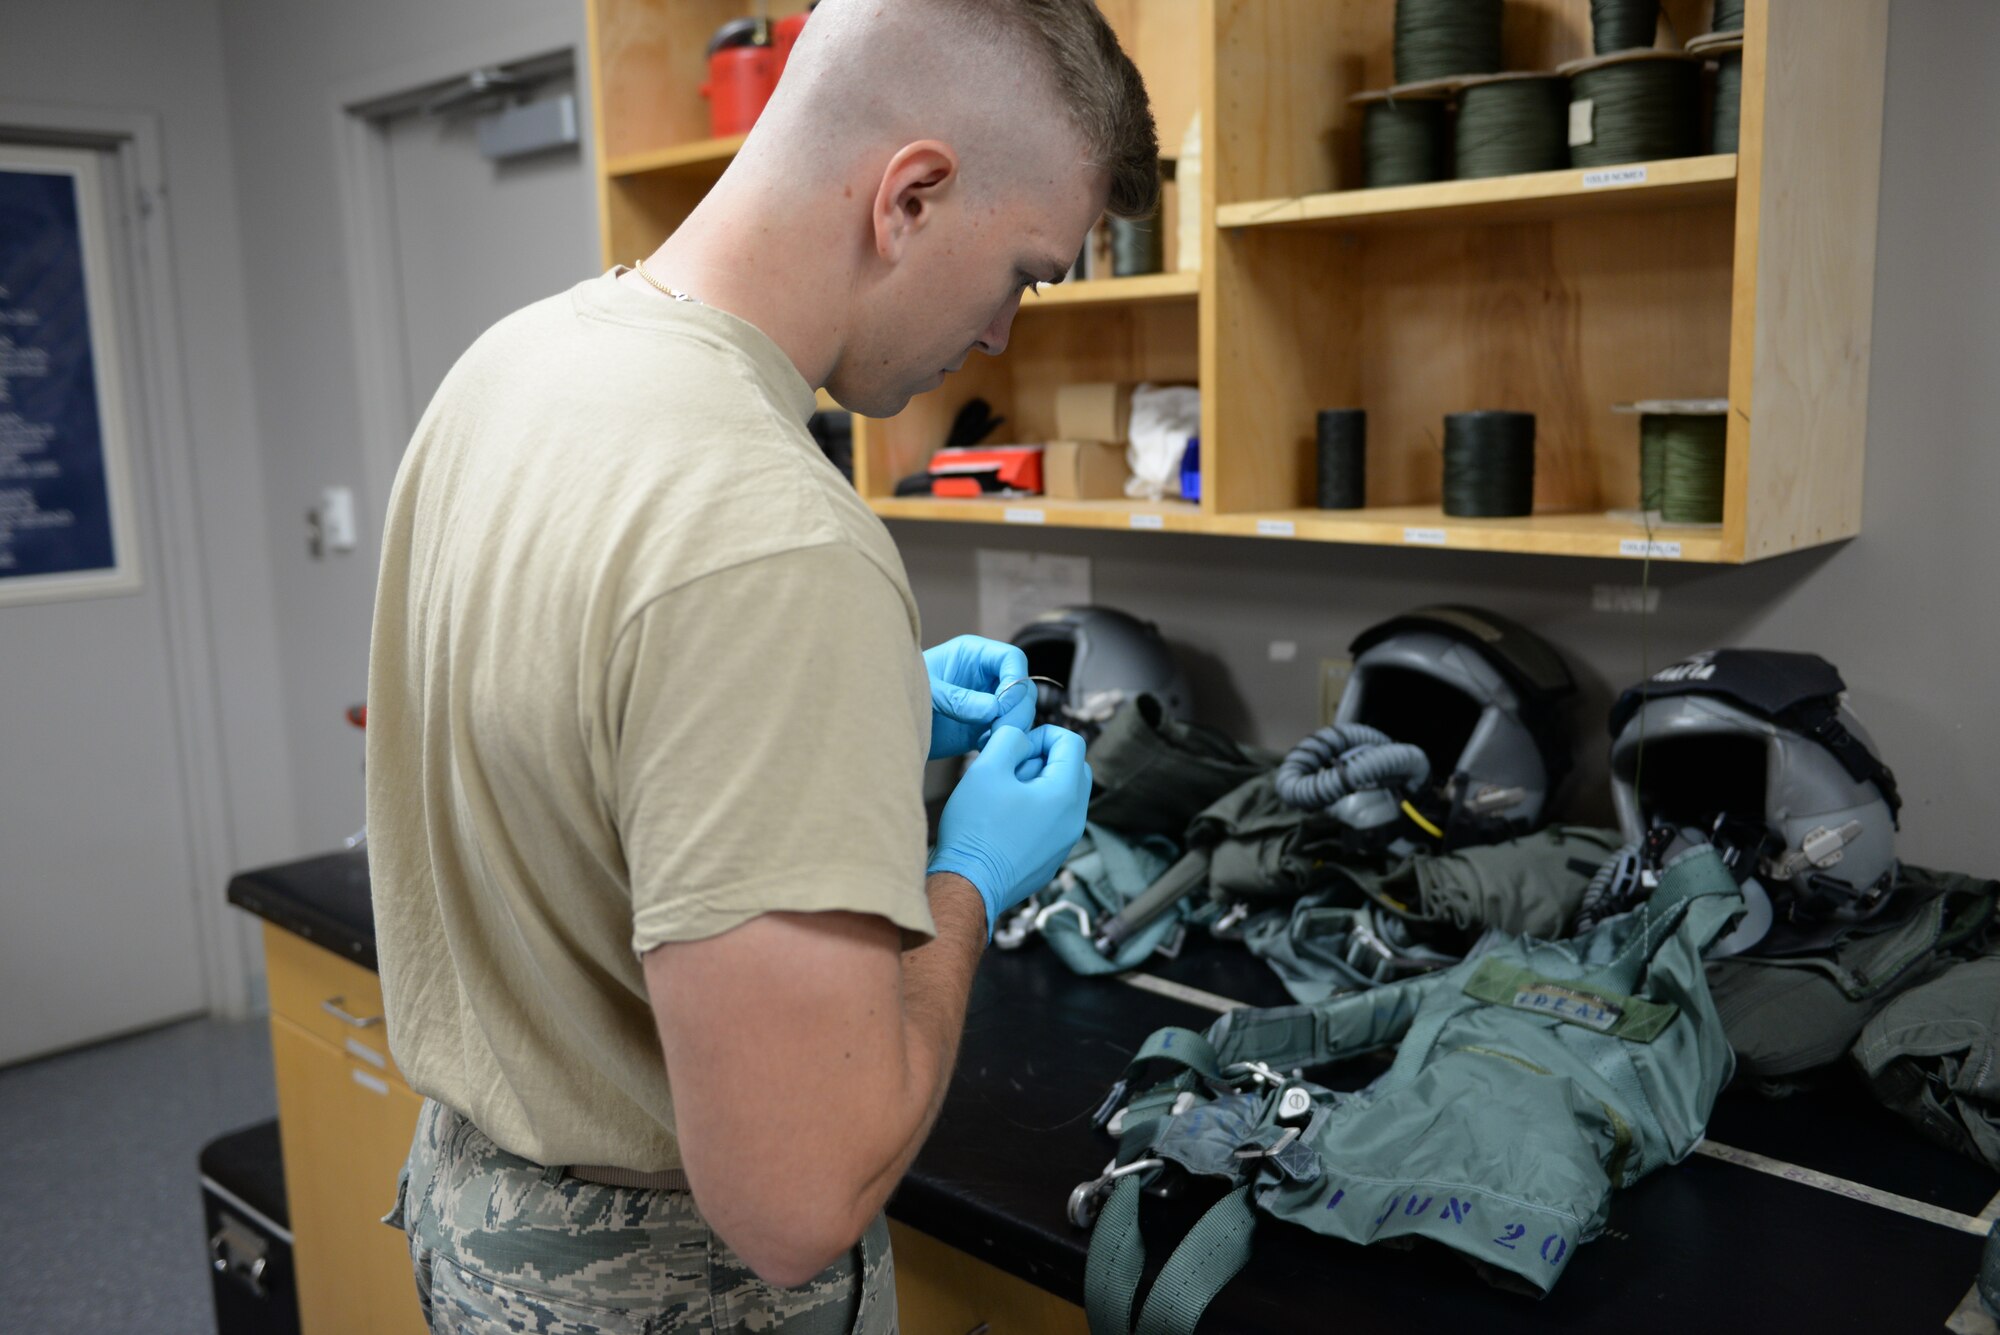 Airman 1st Class Adam Nichols, 37th Flying Training Squadron Aircrew Flight Equipment specialist, prepares to work on a pilot’s harness on June 10, 2020, at Columbus Air Force Base, Miss. AFE specialists perform operator maintenance and service inspections on flight equipment.  (U.S. Air Force photo by Airman 1st Class Davis Donaldson)